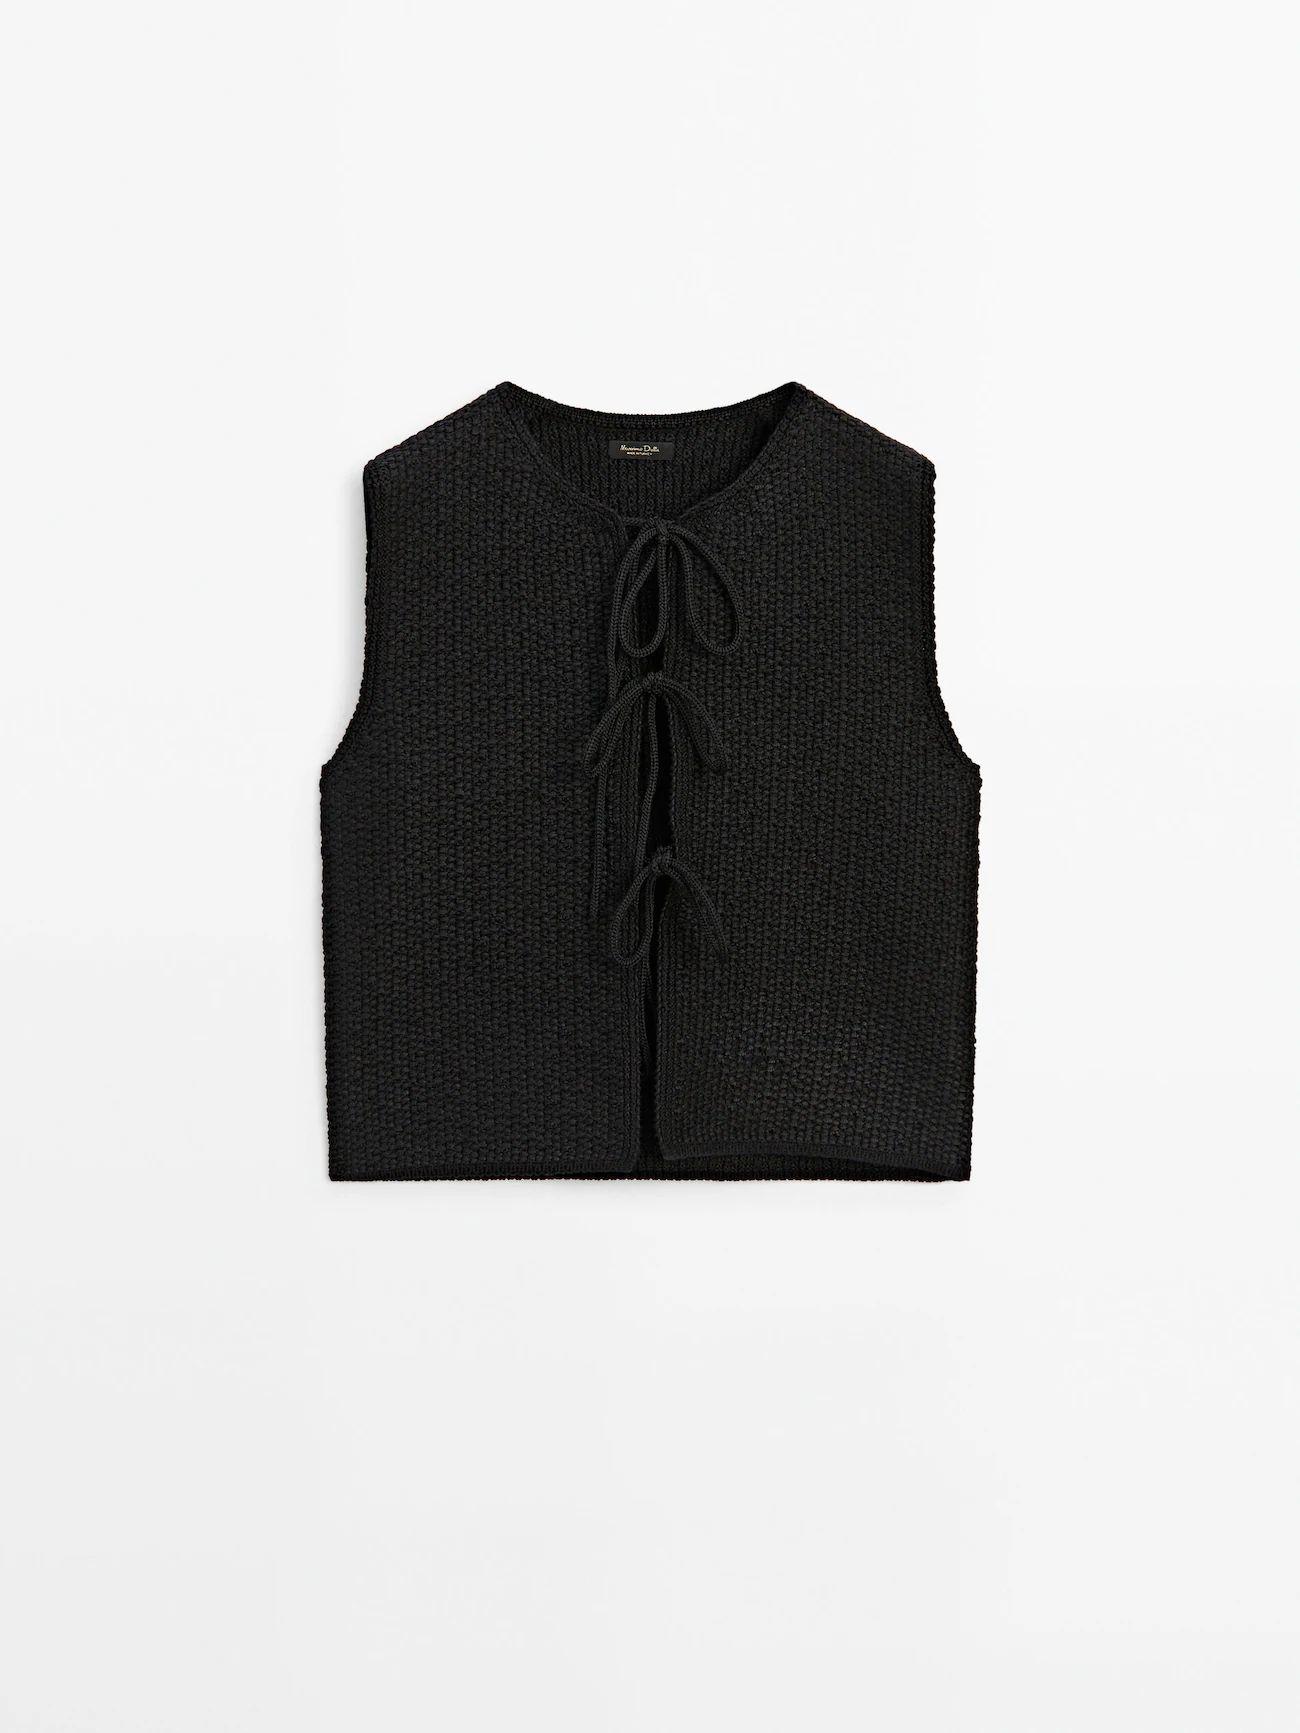 Knit vest with a crew neck and tie details | Massimo Dutti UK